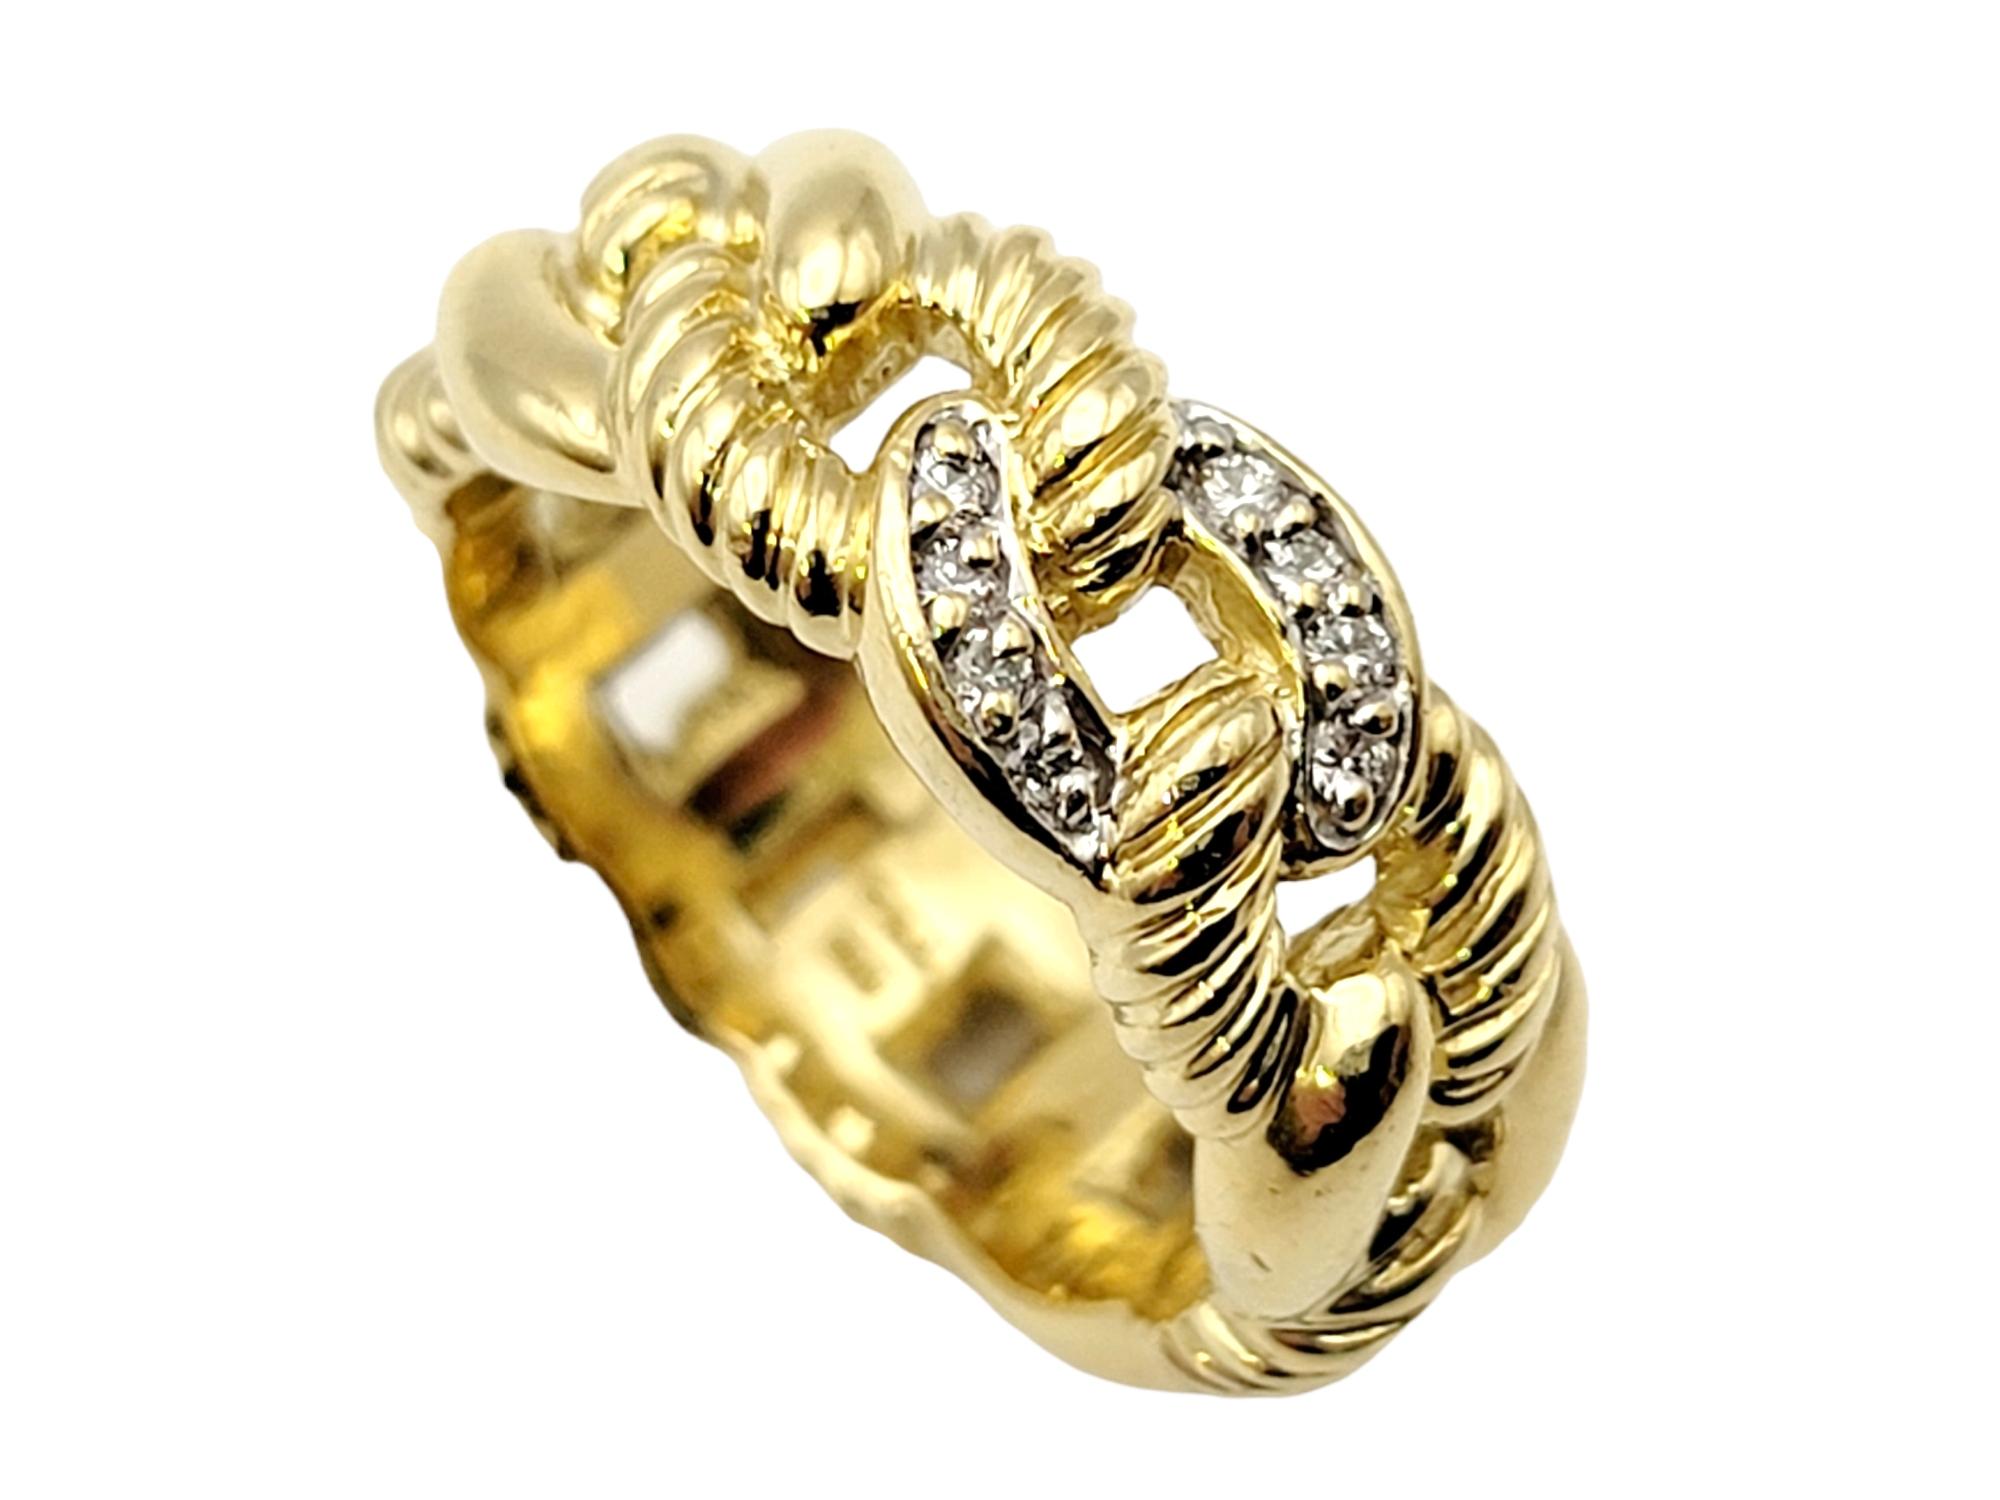 Ring size: 6

Elegant 18 karat yellow gold band ring by designer, David Yurman. Featuring interlocking chain links in an alternating pattern of solid and twisted gold, accented with a single sparkling diamond embellished link at the center.

Metal: